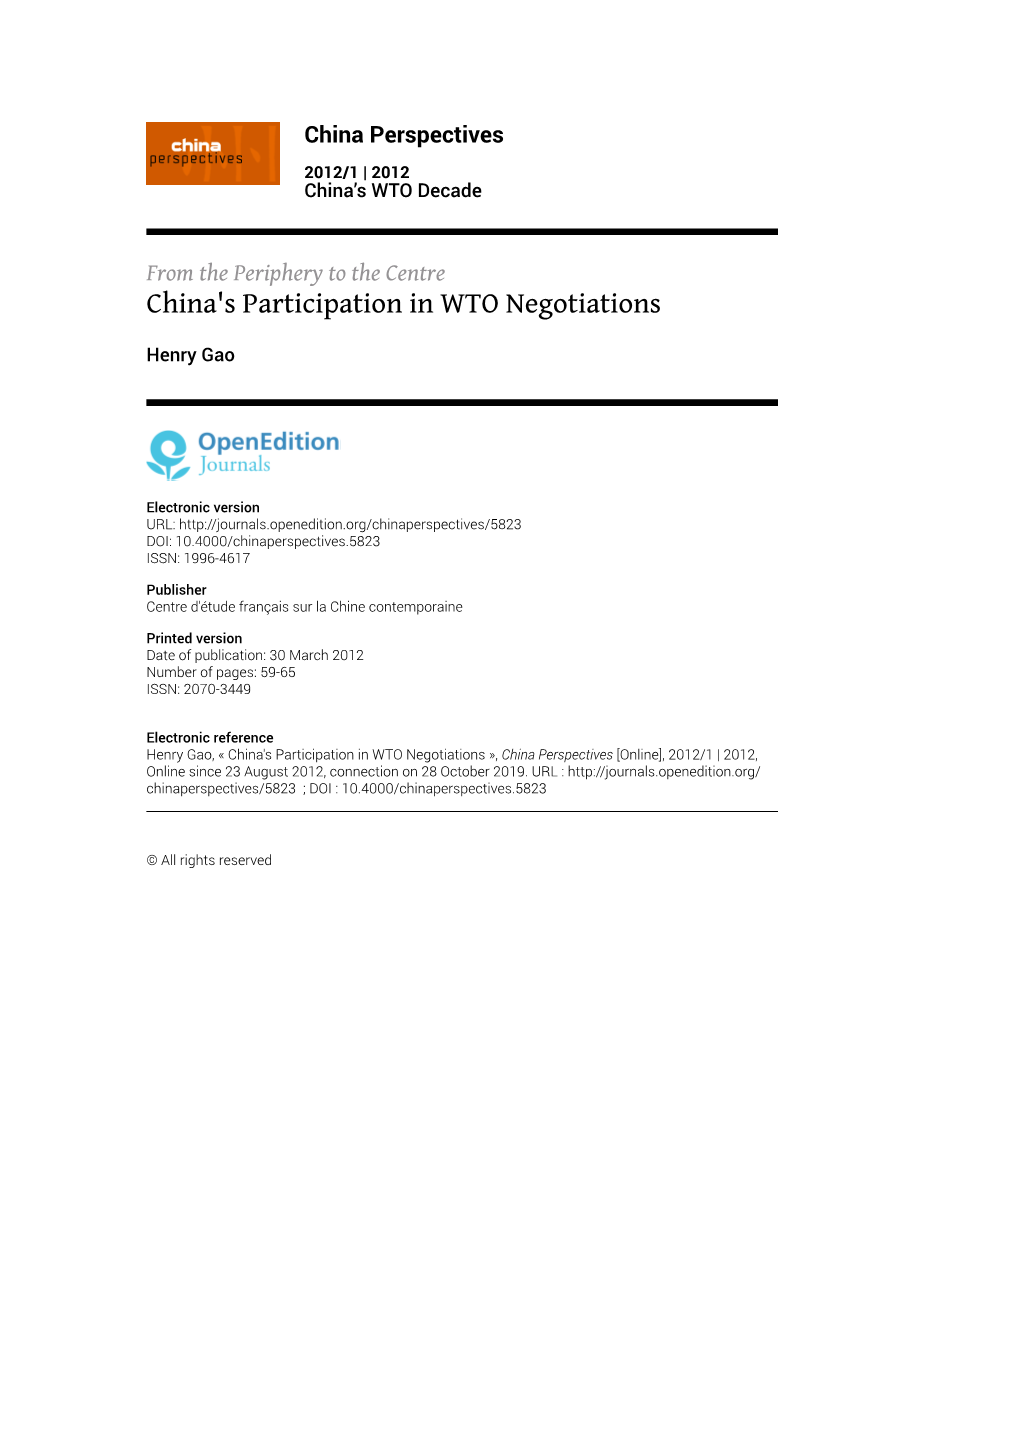 China's Participation in WTO Negotiations